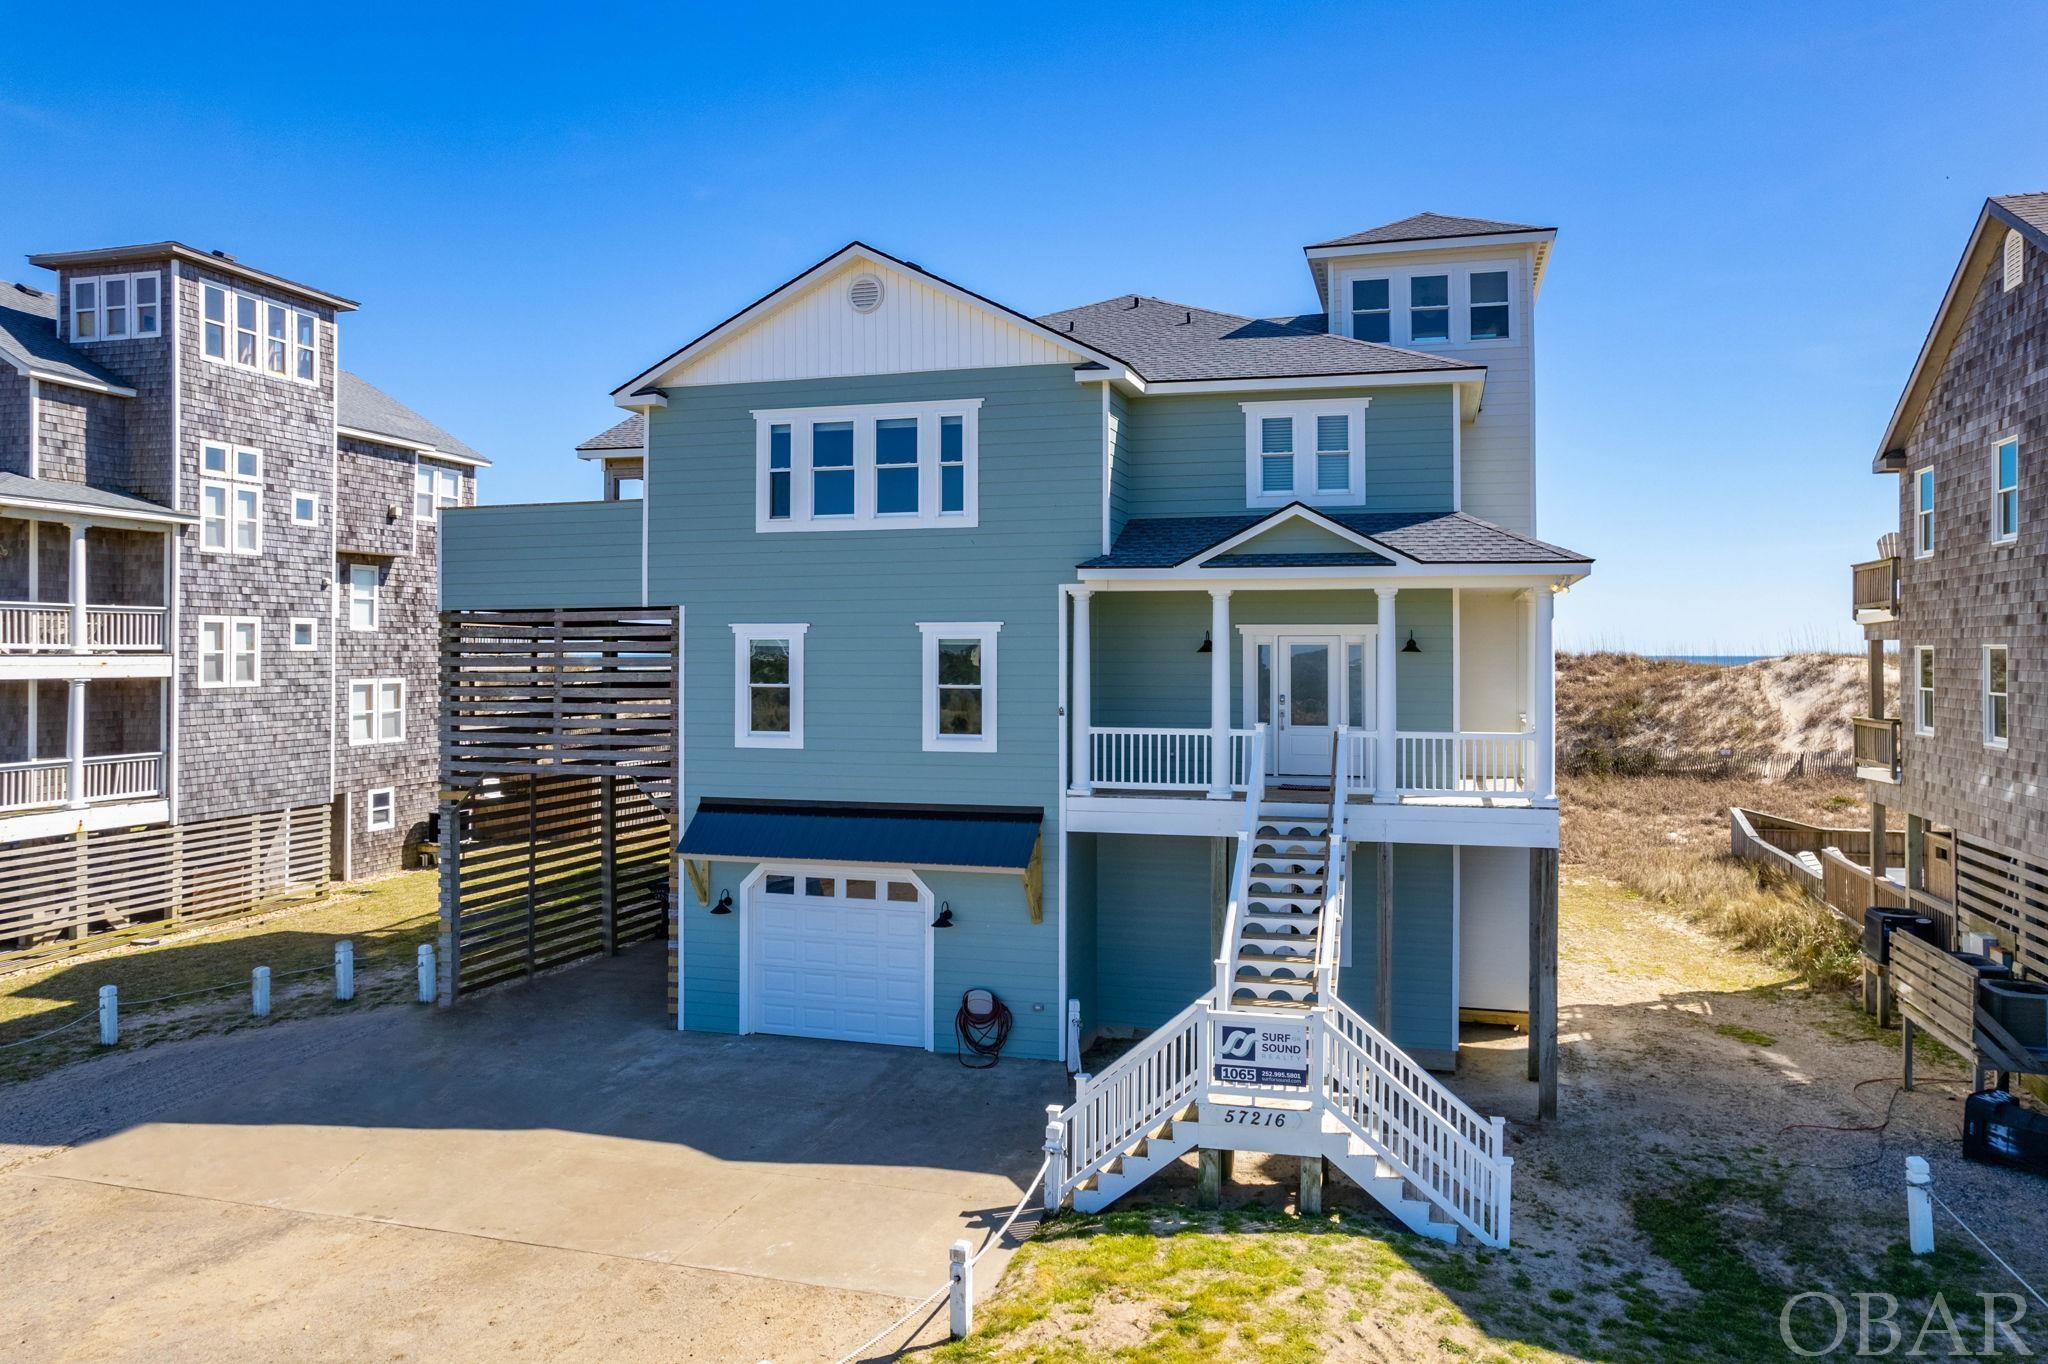 Experience the island life in real time - oceanfront and in the heart of Hatteras! This 7-bed, 7.5-bath home has been meticulously renovated from top to bottom and inside and out. The finished product is exquisitely appealing; no expense has been spared, ensuring that every detail hits the highest marks of quality design and craftsmanship. It is truly exceptional! Stepping inside, you're immediately struck by stunning views of the Atlantic no matter which way you turn. The expansive living areas have been designed and furnished with the finest materials by a professional interior designer, creating an atmosphere of pure luxury and sophistication. The transformation of this home is indeed impressive with energy-efficient windows and doors, updated exterior siding and an elevator recently brought up to the latest code. The pool area has been dramatically modified into a breathtaking oasis, complete with a brand new pool house pump, LED pool lighting, and a pool deck stained to perfection. Take a dip in the main pool or wading pool, or relax in the brand new 6-person hot tub while you watch the waves crash against the shore. Outside, you'll find a bar seating area with stools on the lower deck, perfect for entertaining guests or enjoying a cocktail while taking in the stunning ocean views. All of the deck railings have been replaced, and repairs to the floor decking have been completed, ensuring that the outside of the property is just as exceptional as the inside. A modern and stylish metal roof eave has been installed over the garage door area, and an electric EV charger in the open carport area. Inside, you'll find a fun-filled arcade room with a Pac-Man machine and a wet bar, perfect for enjoying a game or two with friends and family. The kitchen has been completely upgraded with brand new cabinets, polished granite counter tops, and new appliances, including two new induction cook tops along with the induction pans and cookware. The bathrooms have been transformed into relaxing spa-like retreats. This property truly has it all, including a brand new 50-gallon water heater, updated interior paint, and new carpet and engineered wood floors throughout. With jaw-dropping views from every spot in the house, this oceanfront property is the epitome of luxury living. Don't miss out on the opportunity to make this exceptional property your own.